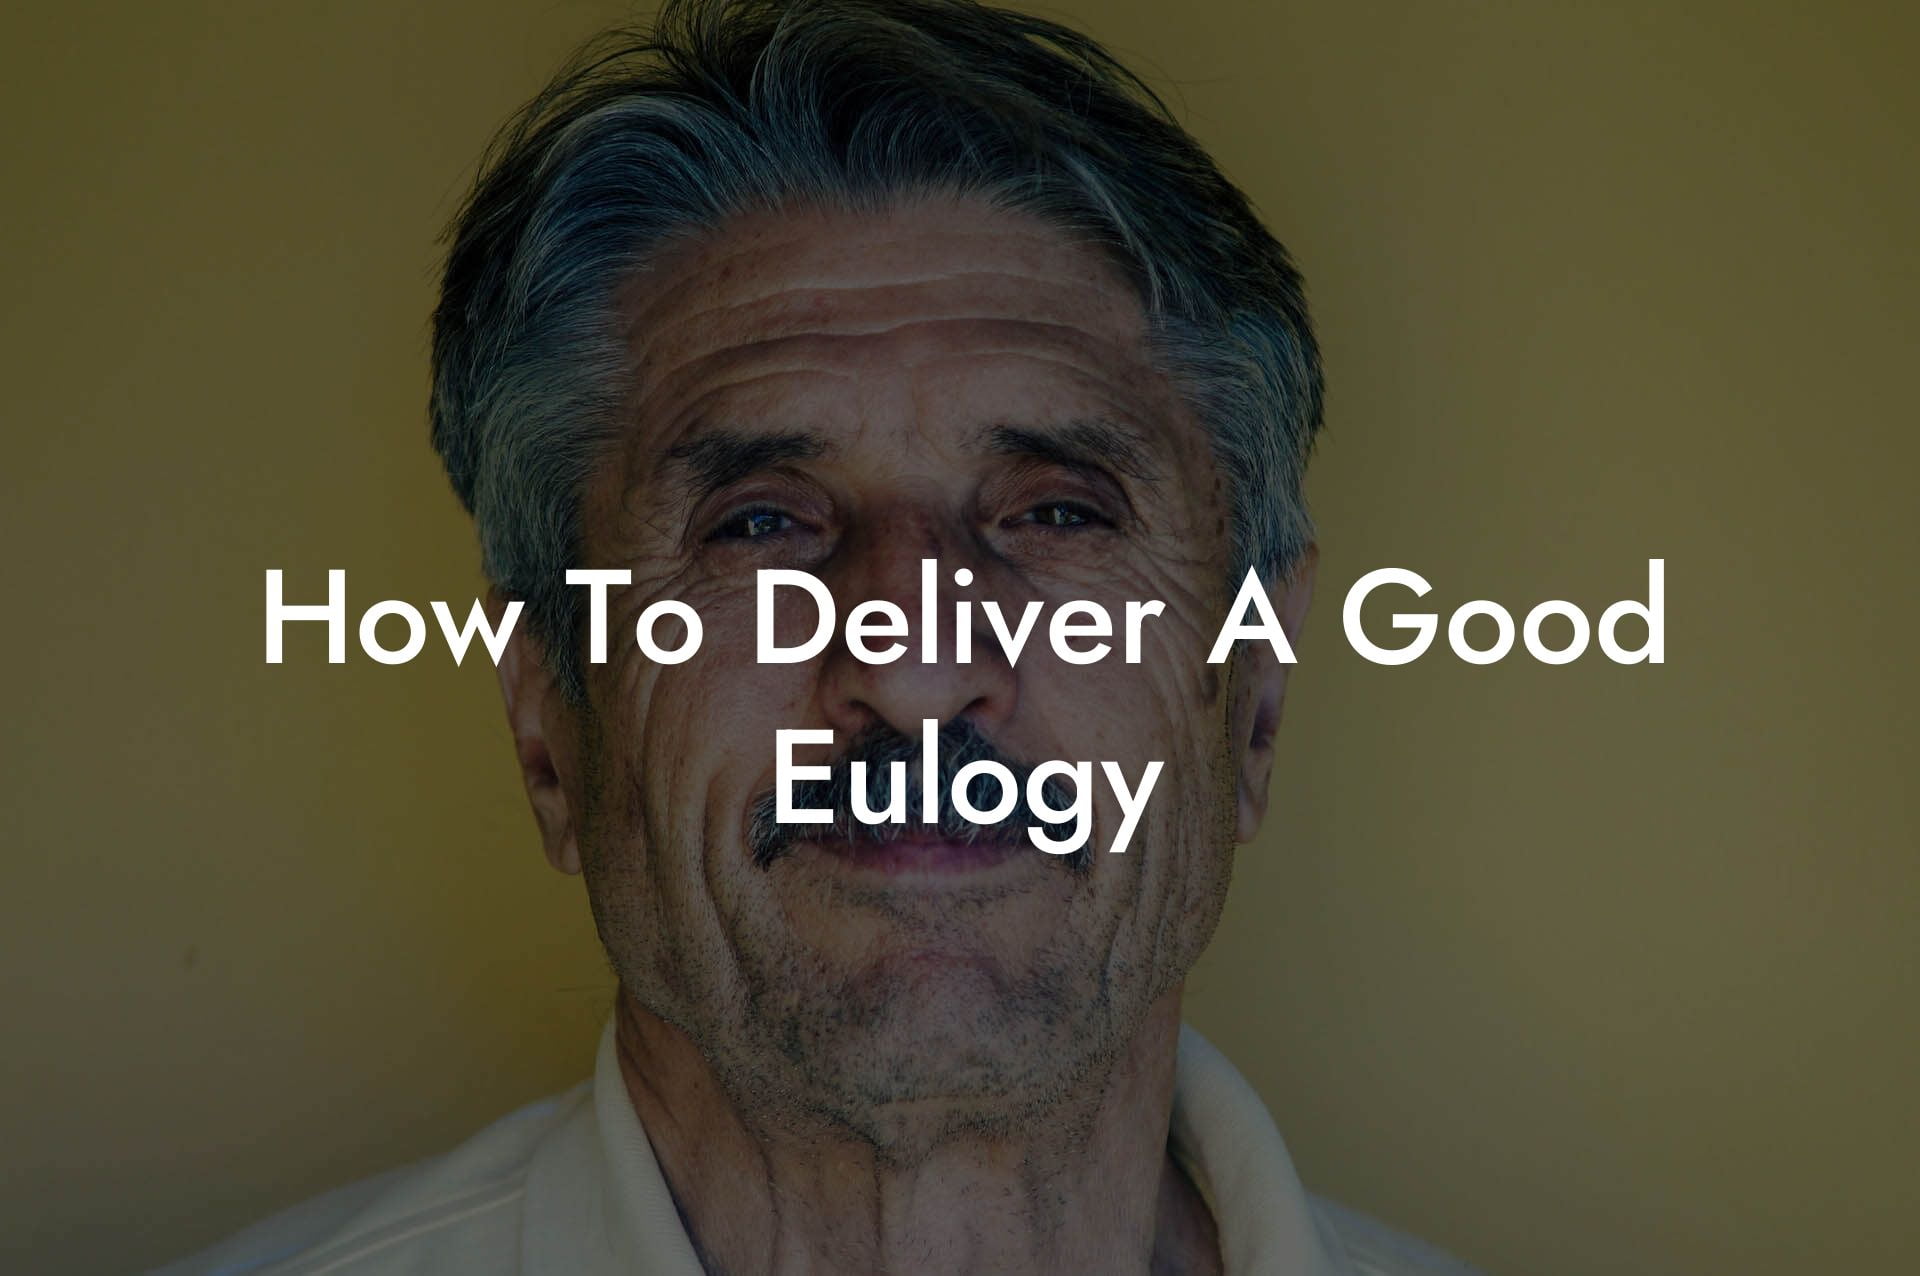 How To Deliver A Good Eulogy